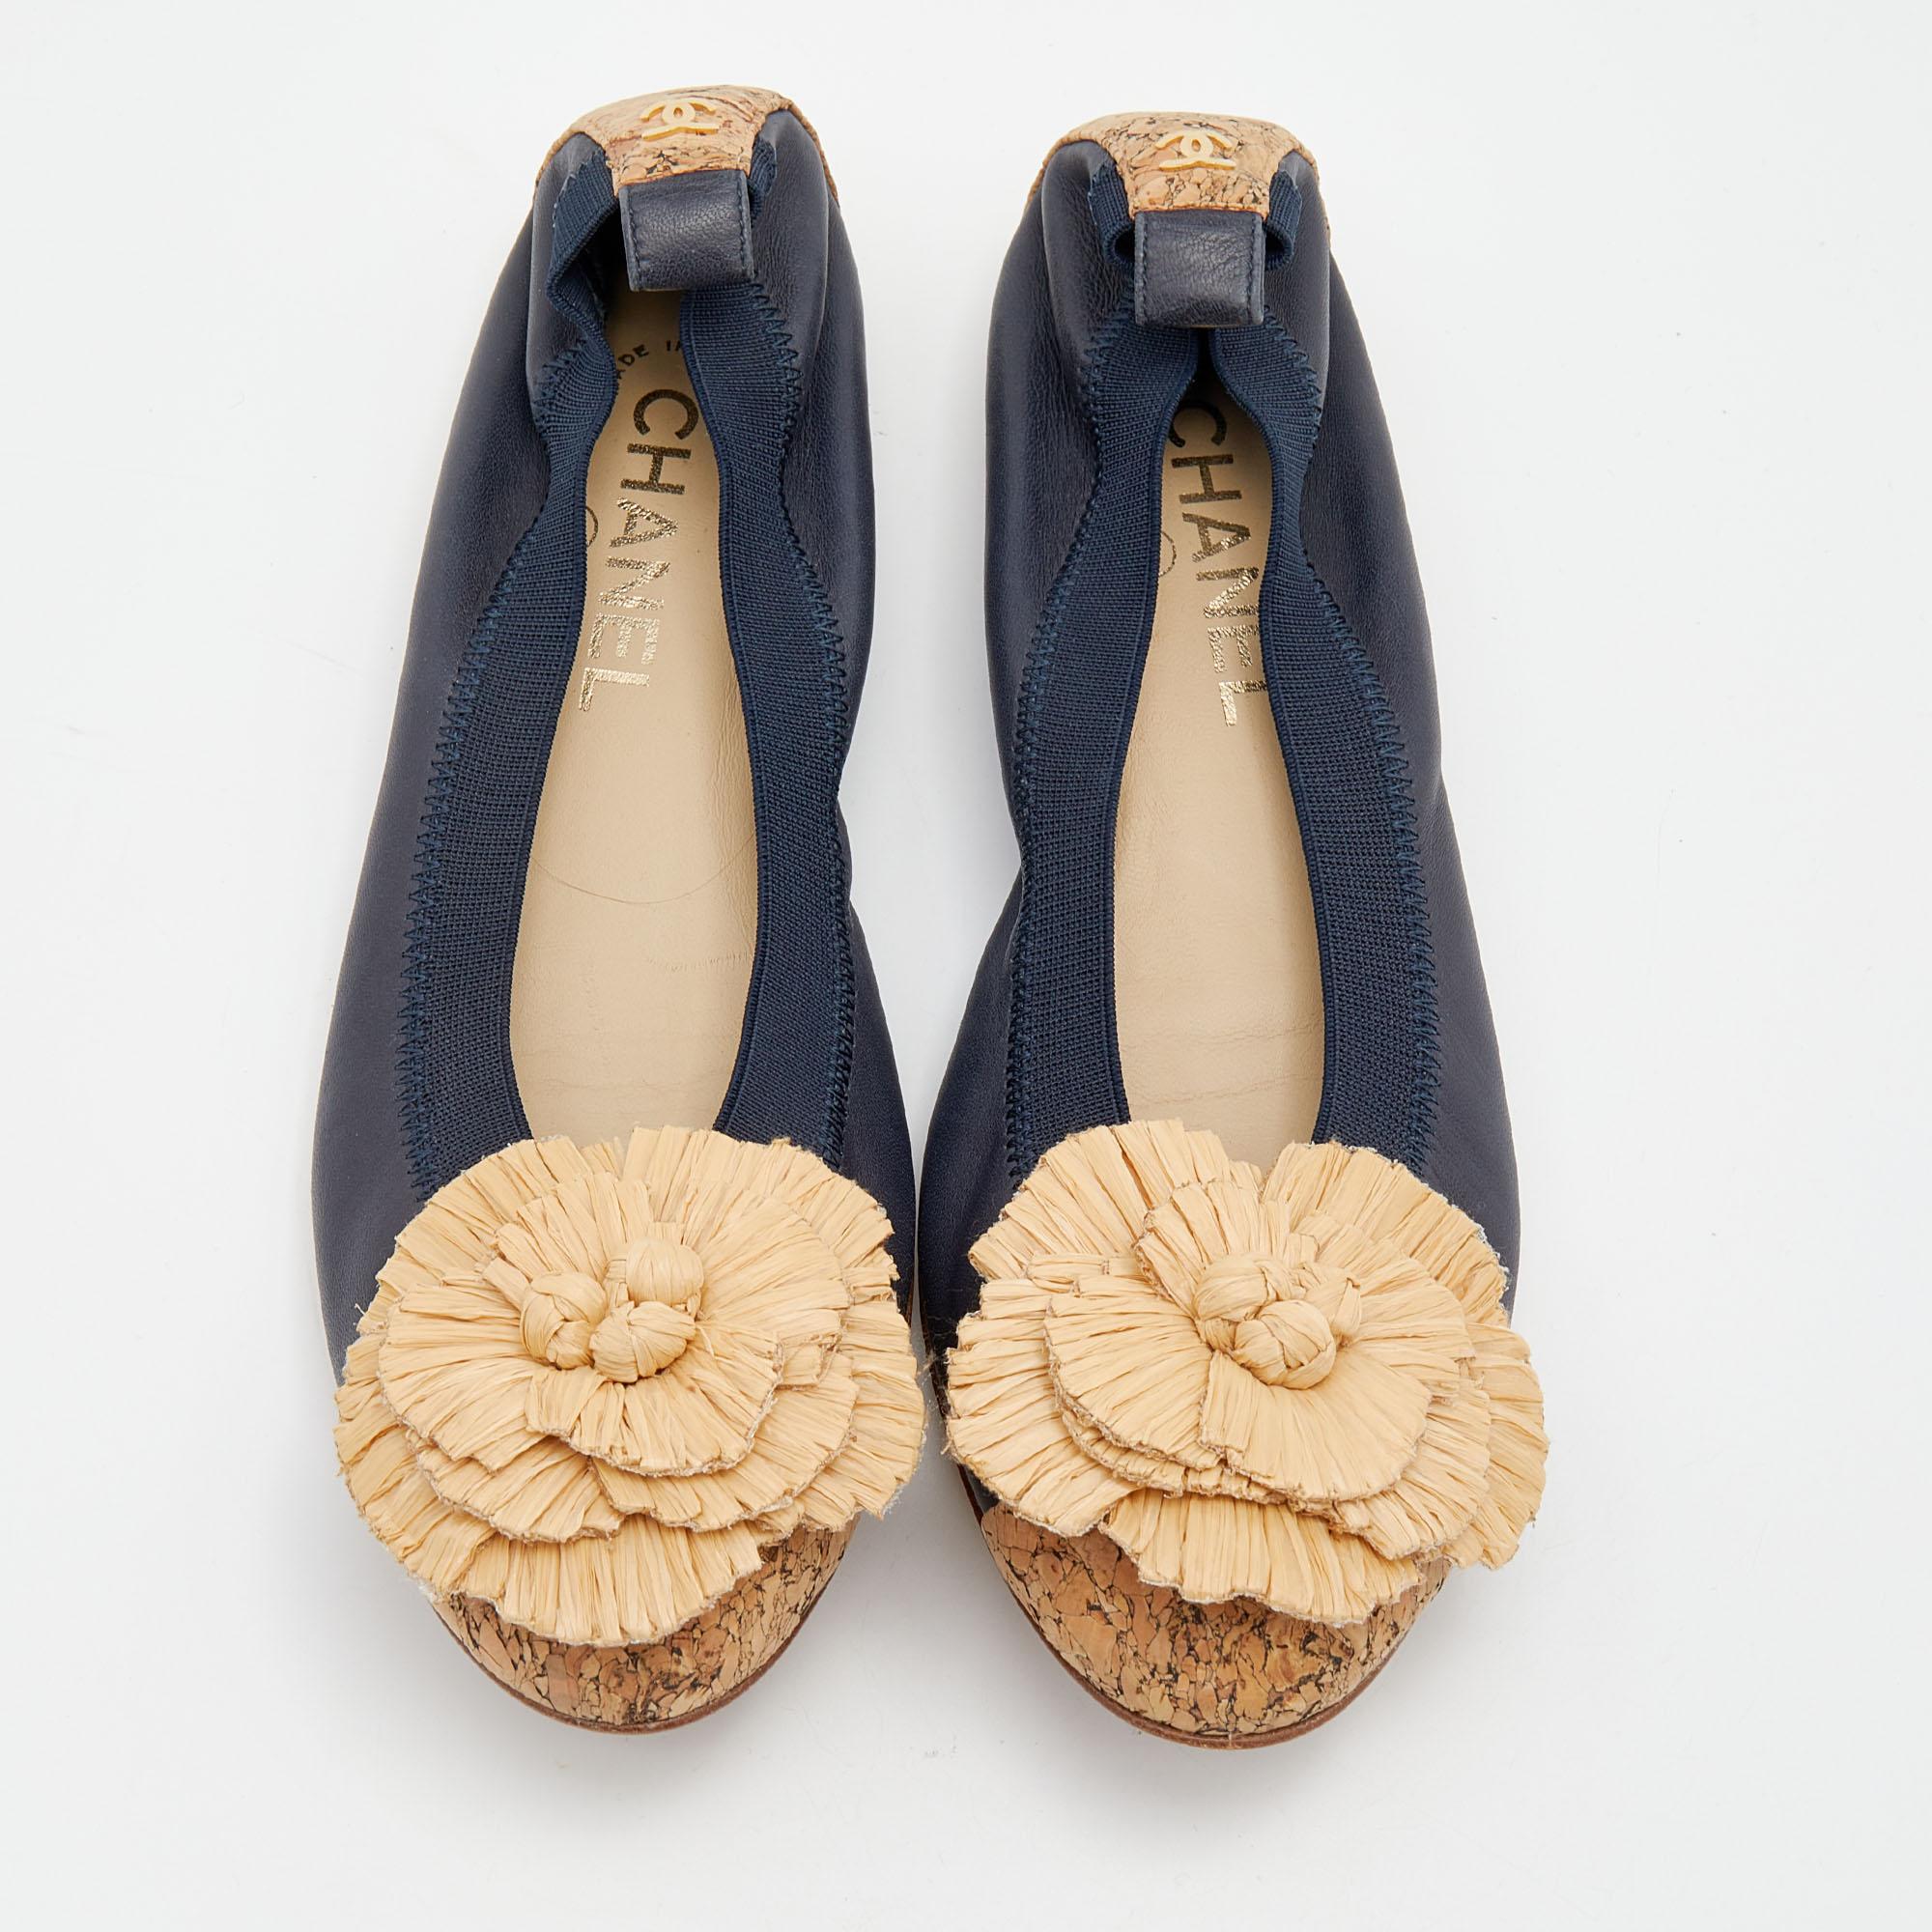 Adorning these Chanel scrunch ballets will give you an instant dose of contemporary cool. Covered in leather, they are decorated with the brand's signature Camellia flower in straw on the uppers.

